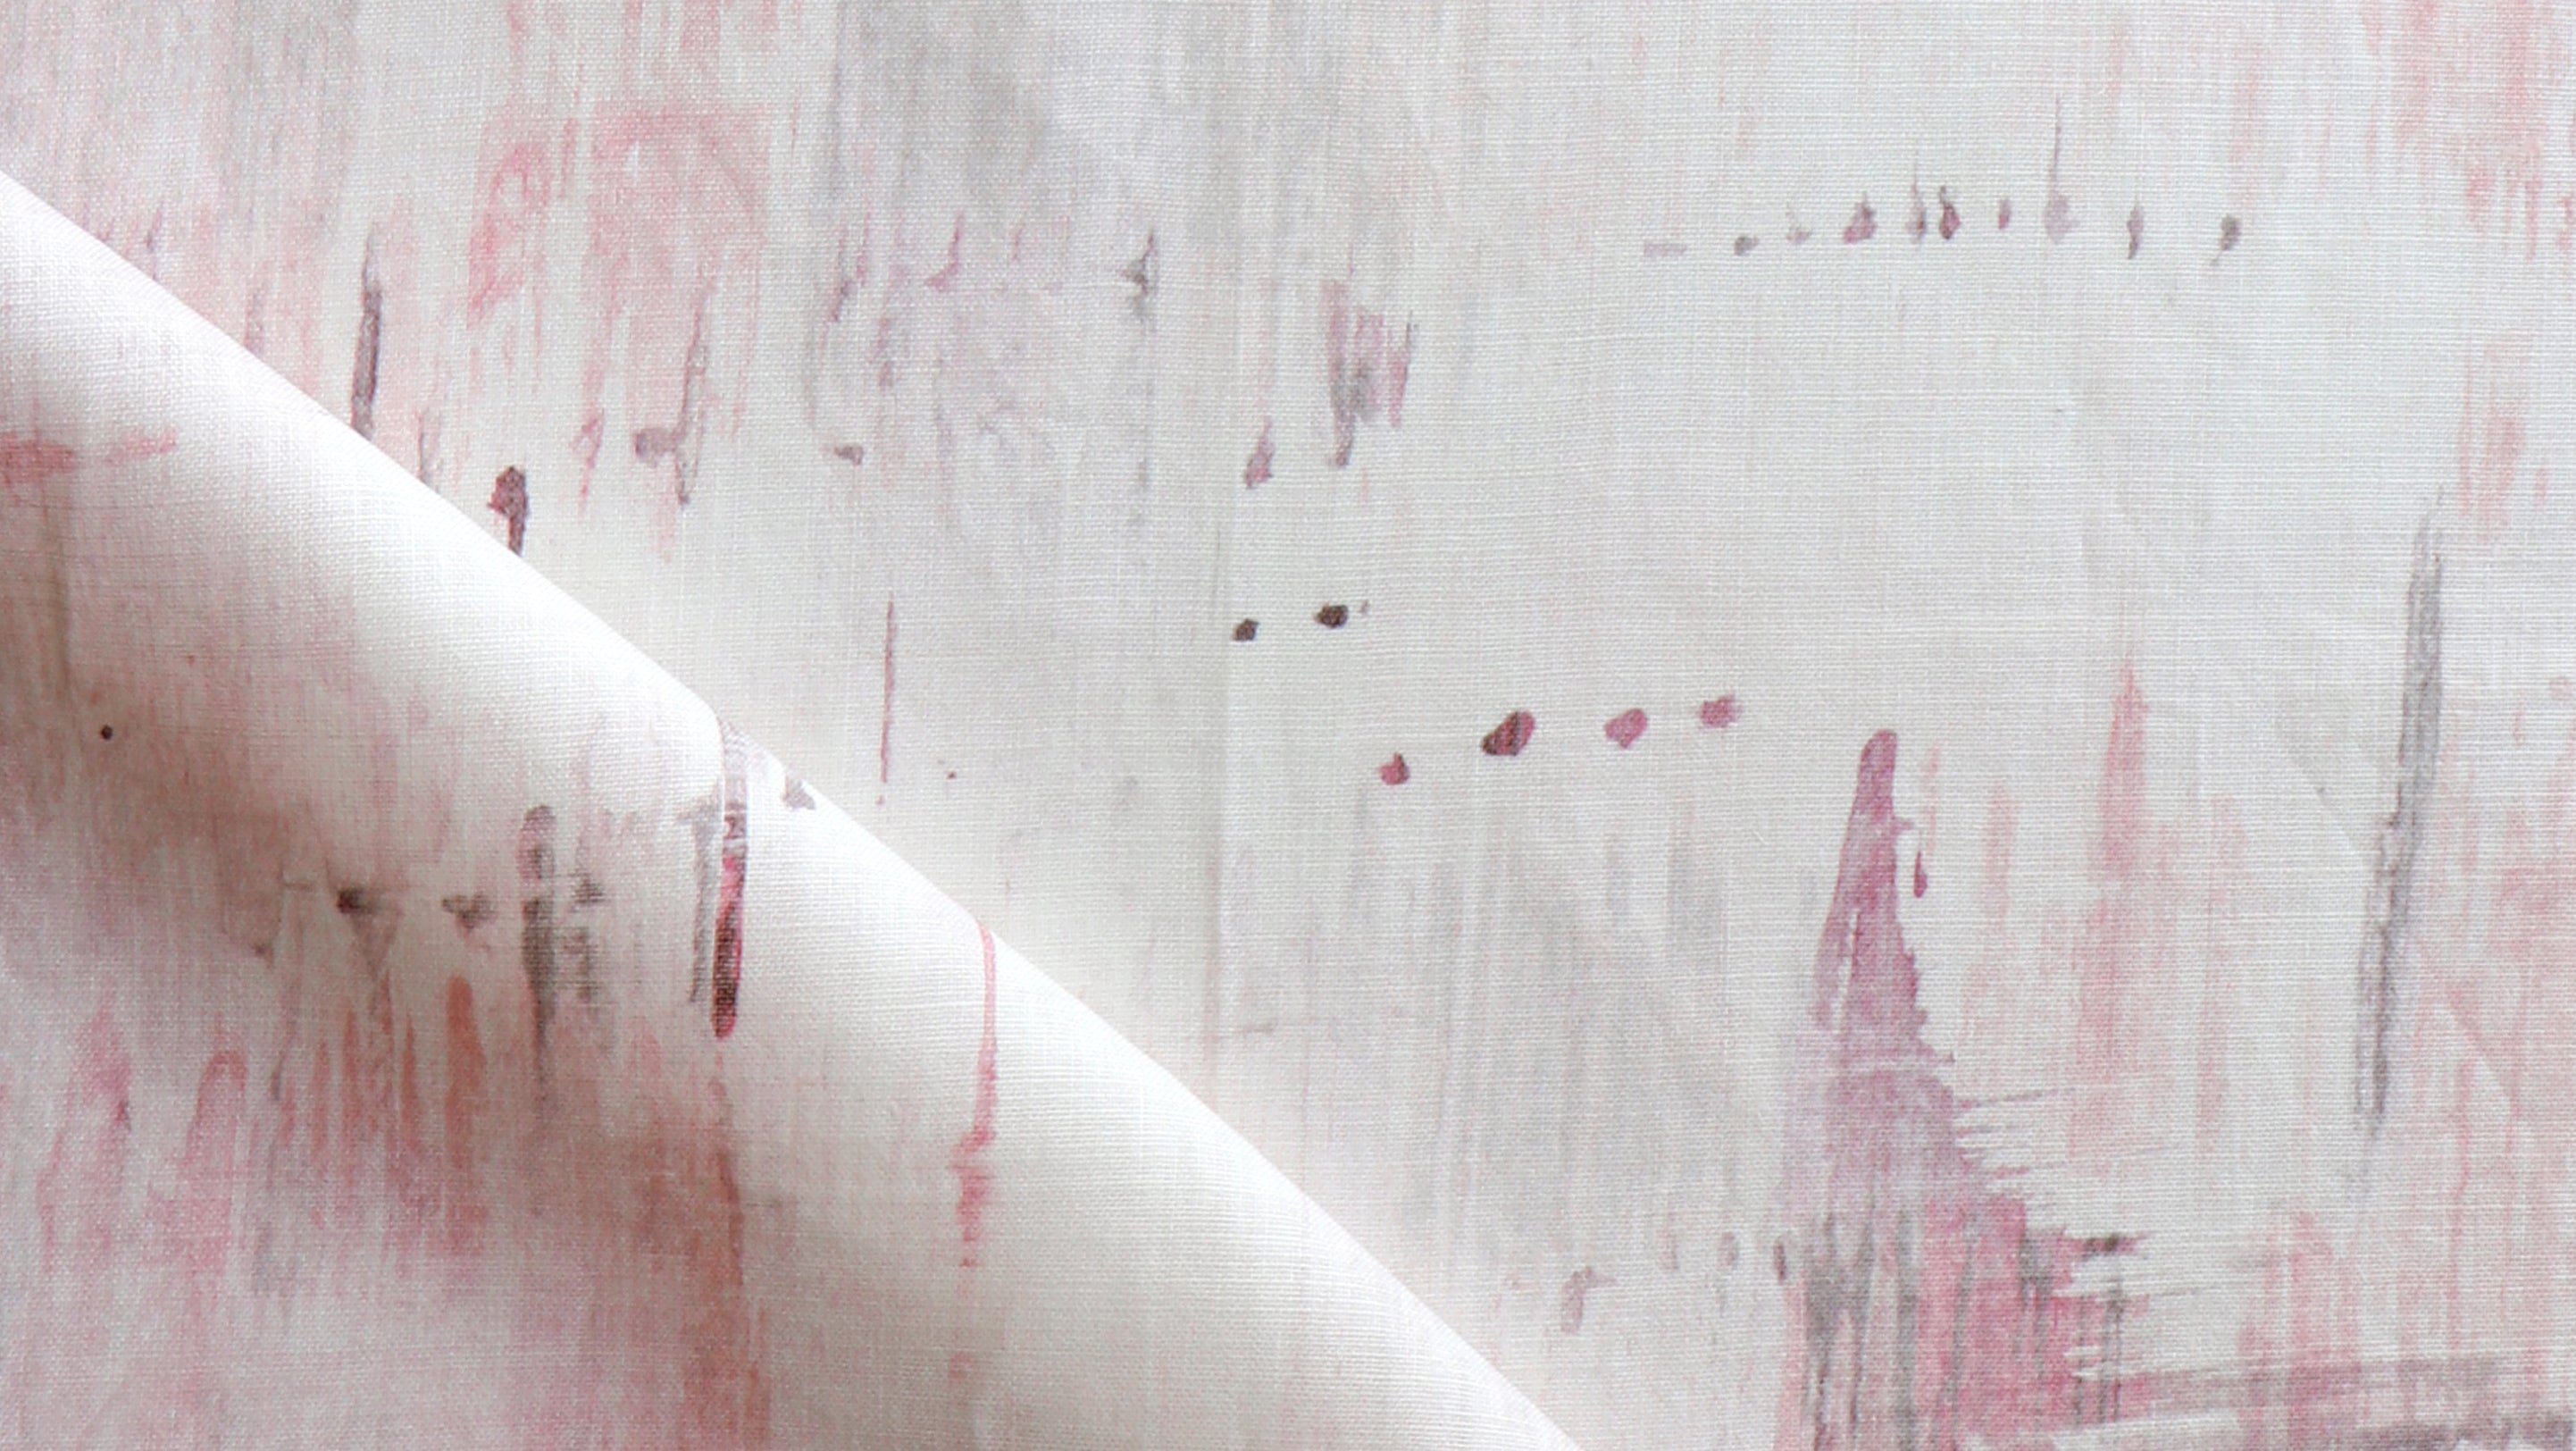 A close up of a pink and white painting on fabric